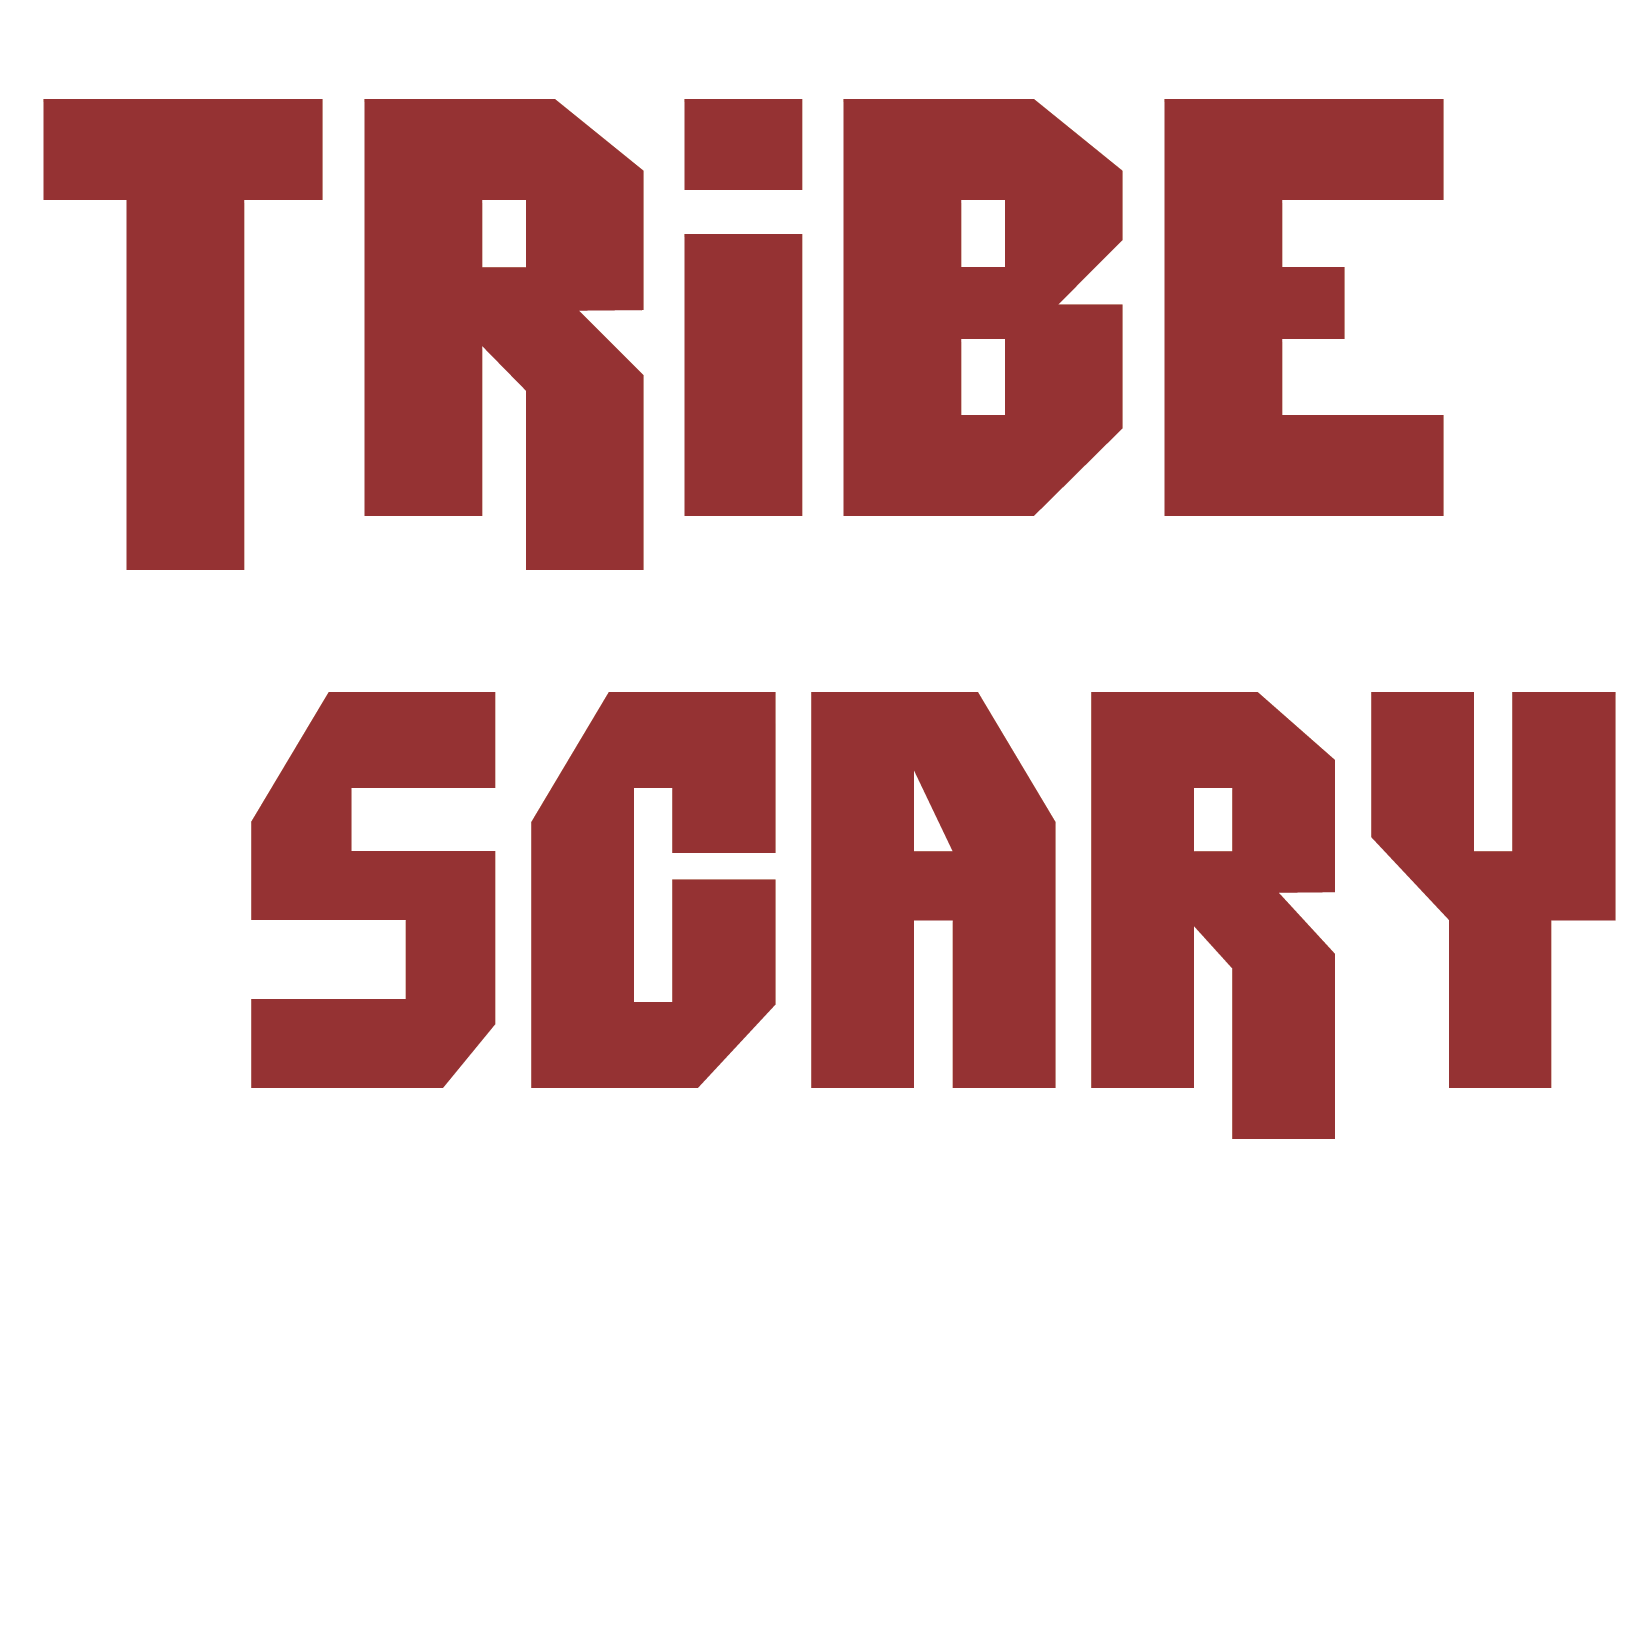 tribe scary code 201d88